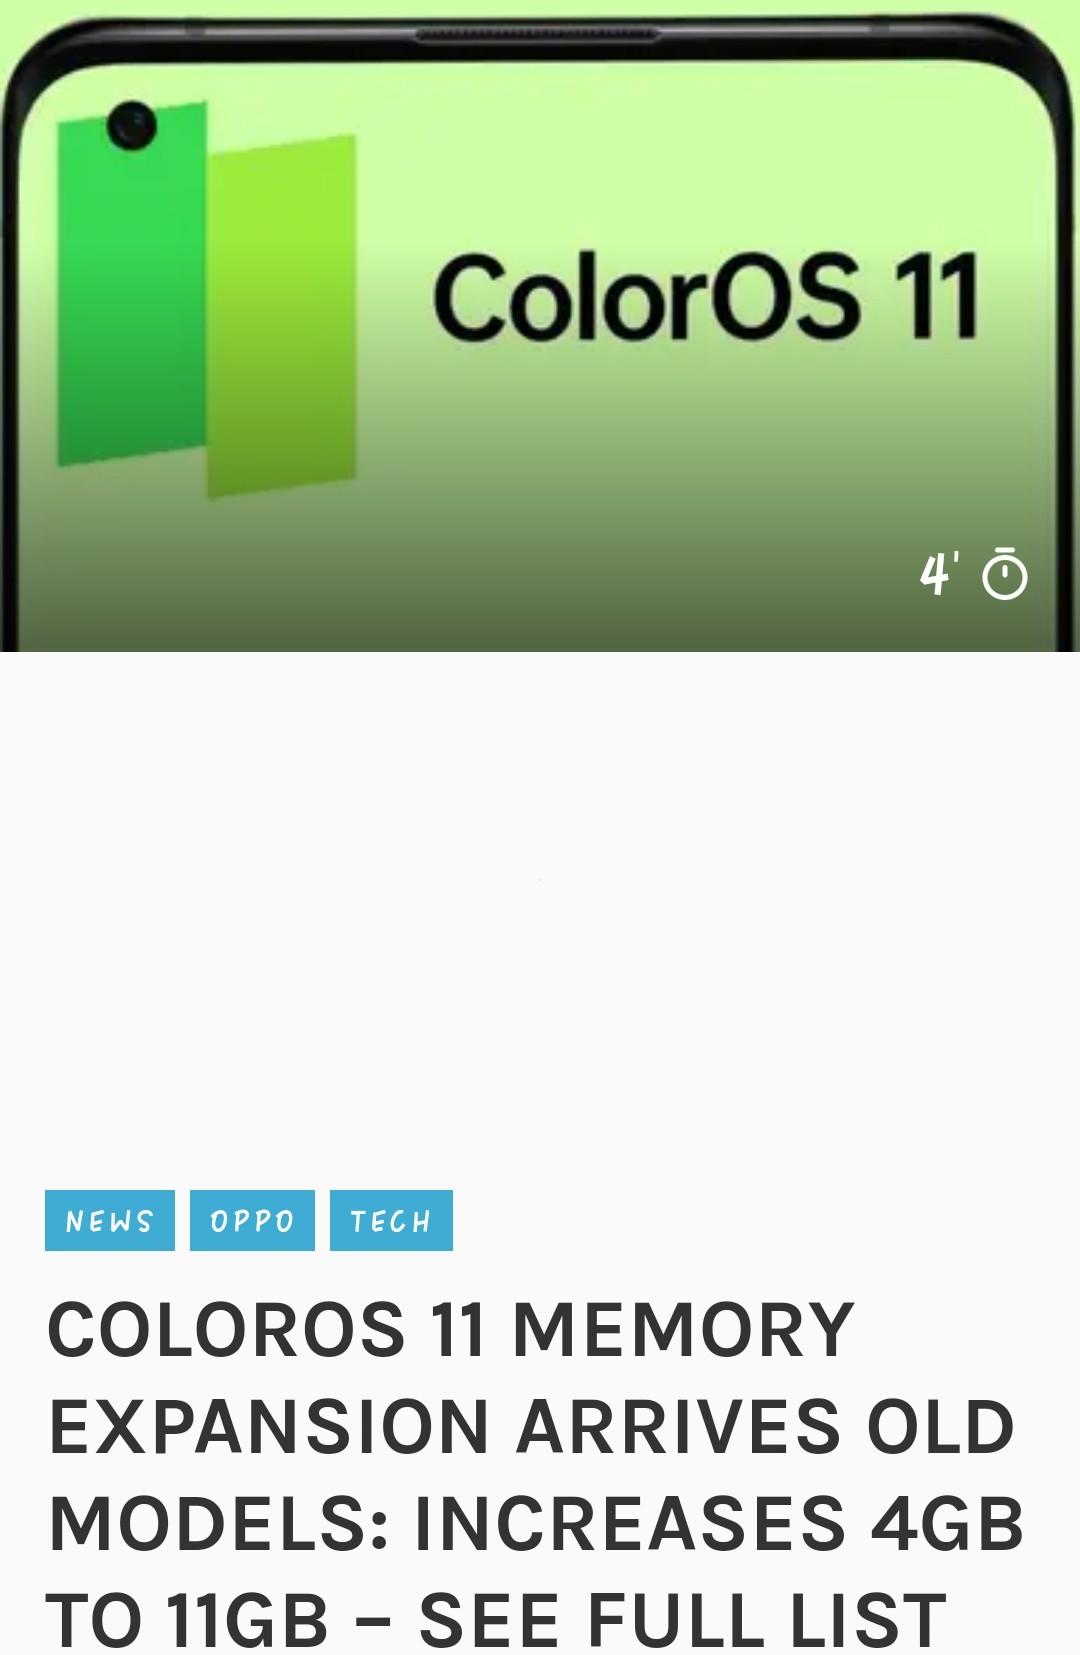 ColorOS 11 memory expansion arrives old models: Increases 4GB to 11GB – See FULL LIST 